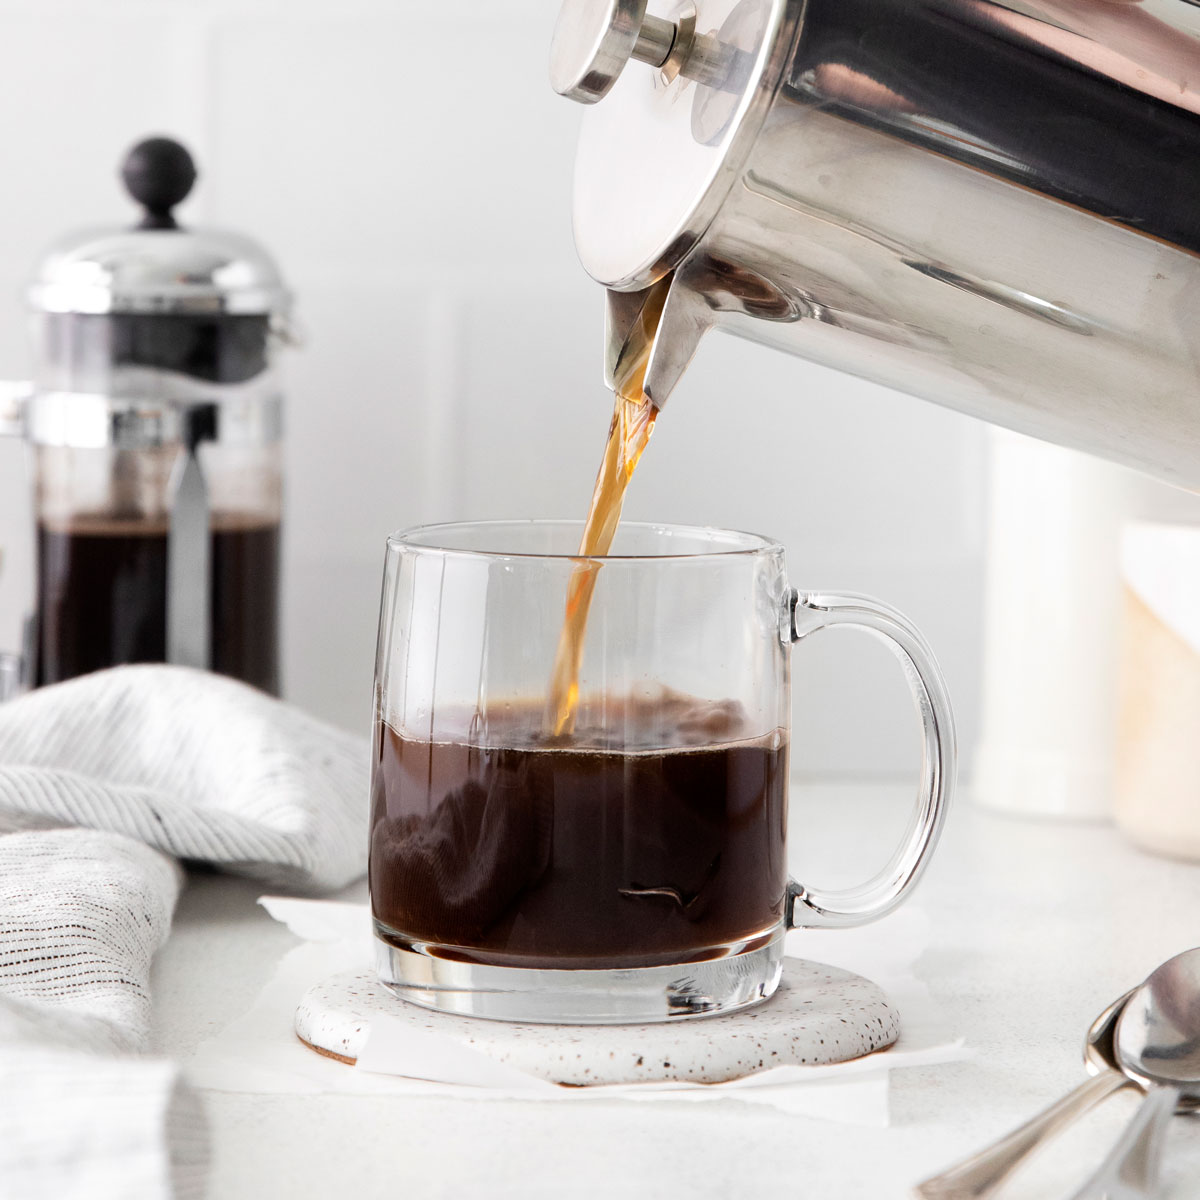 This Cold Brew Coffee Maker That's 'Better Than Starbucks' Is $27 on   - Parade